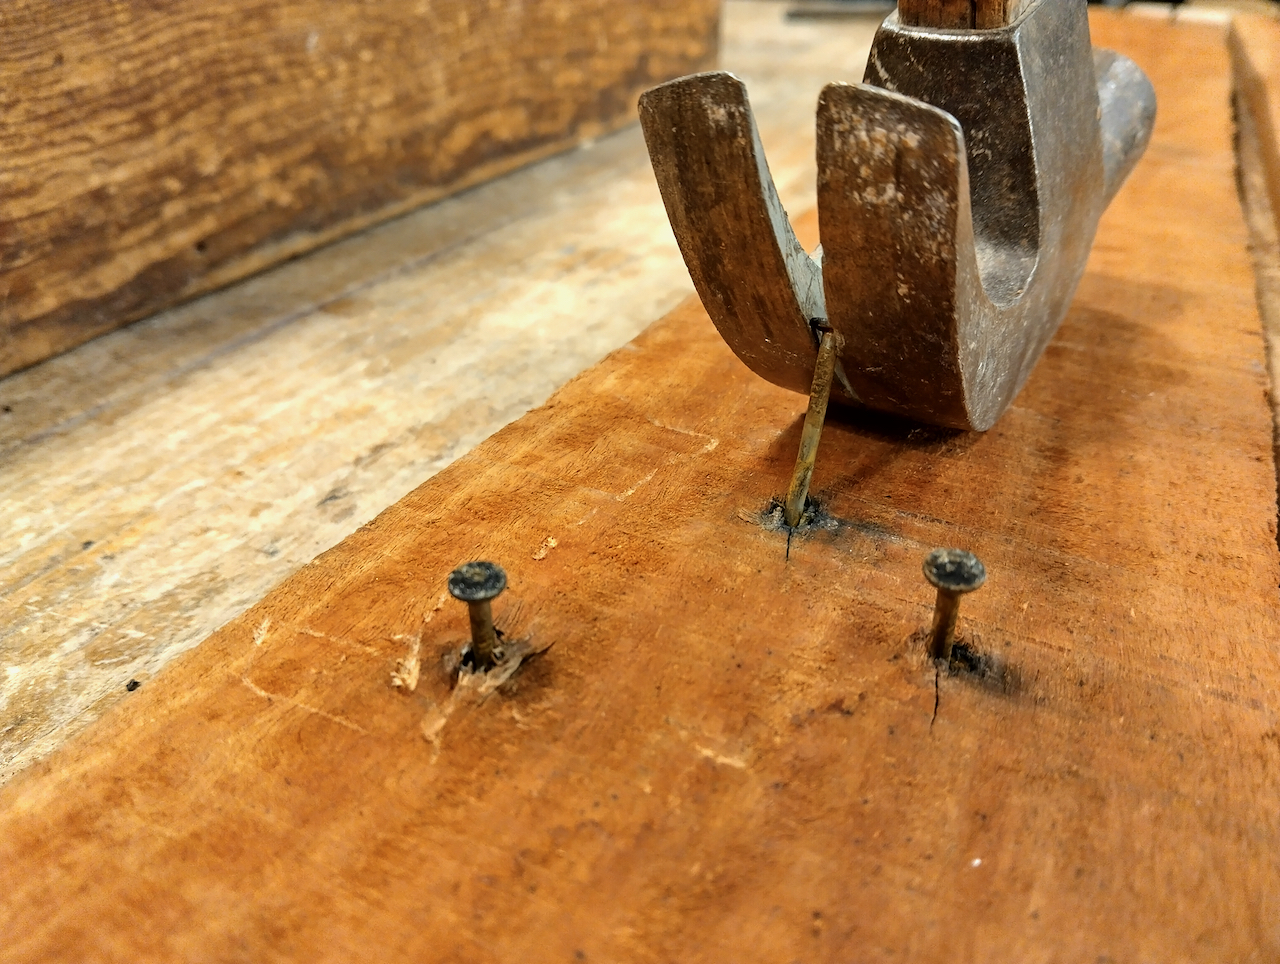 Yoav uses a hammer to pry nails from a reclaimed board.